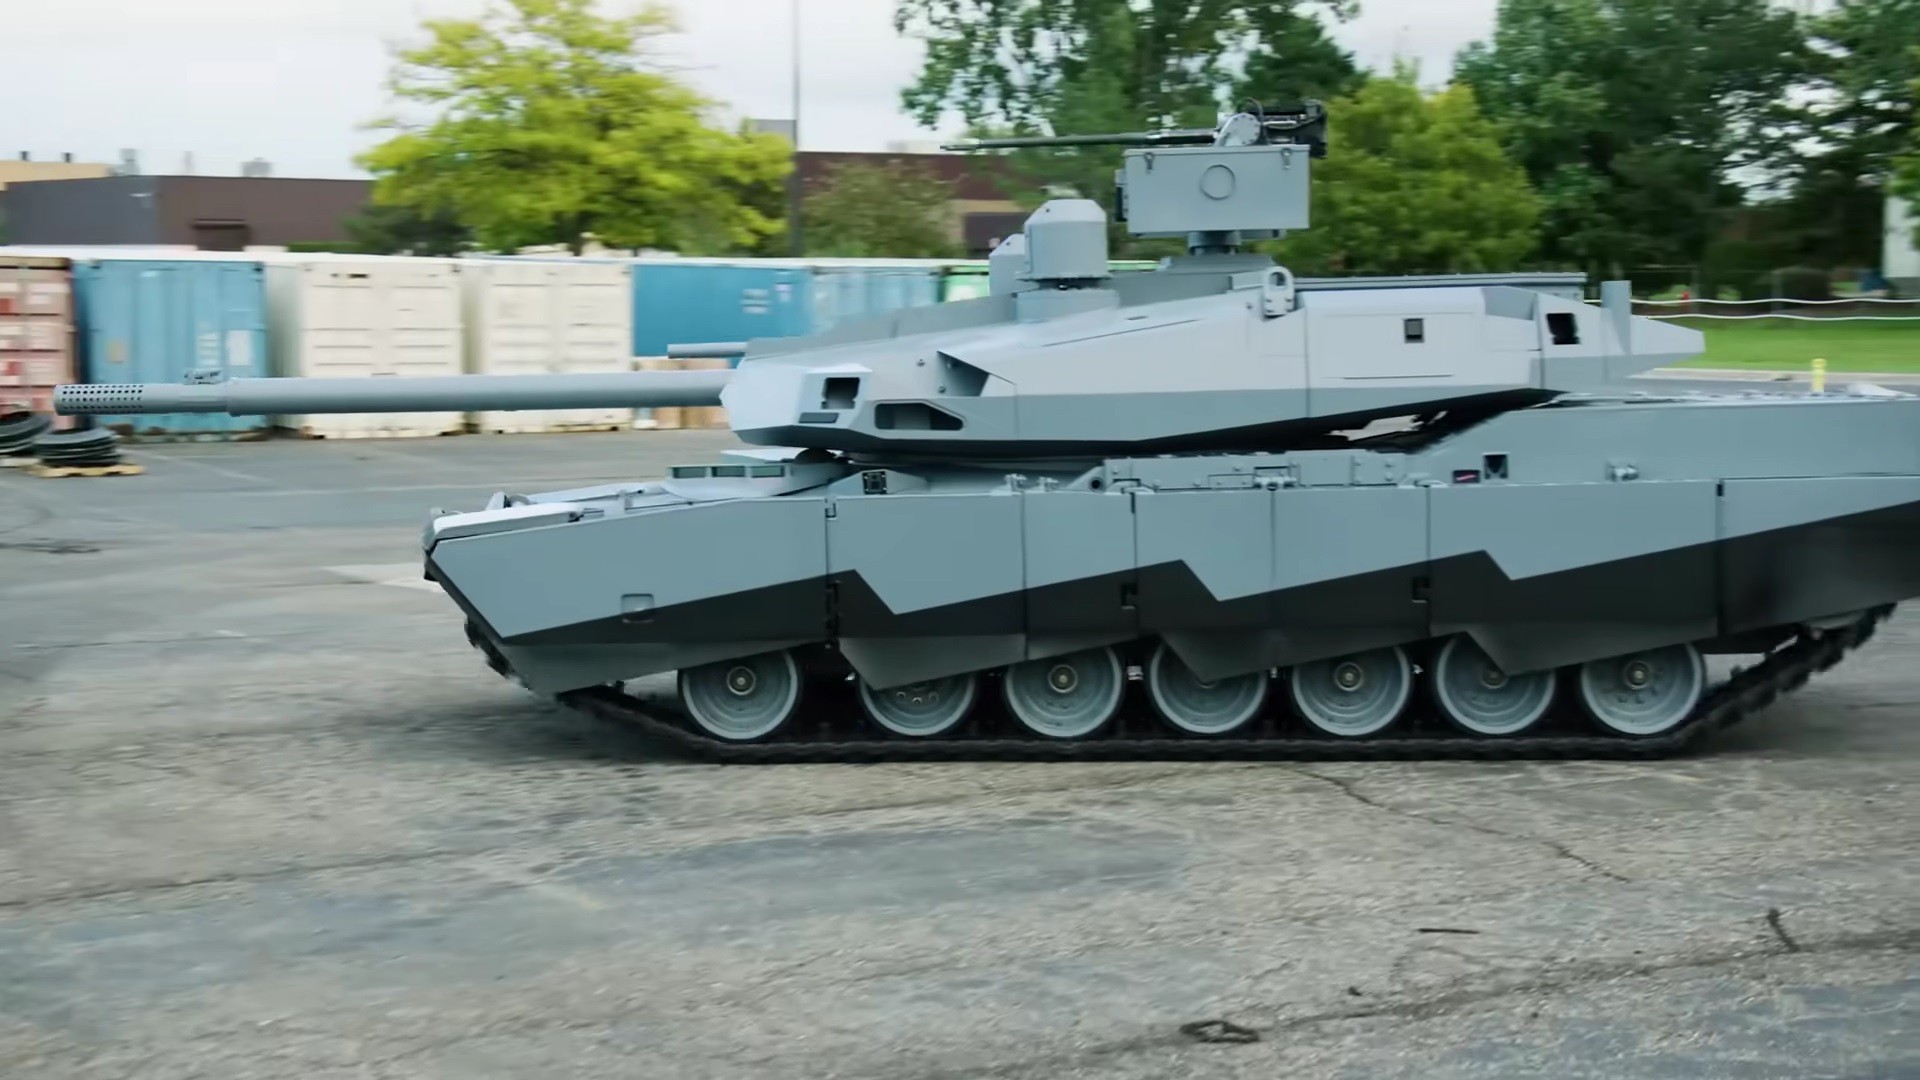 Abrams X Emerges As the Tank of the Future, YouTube Video Shows It